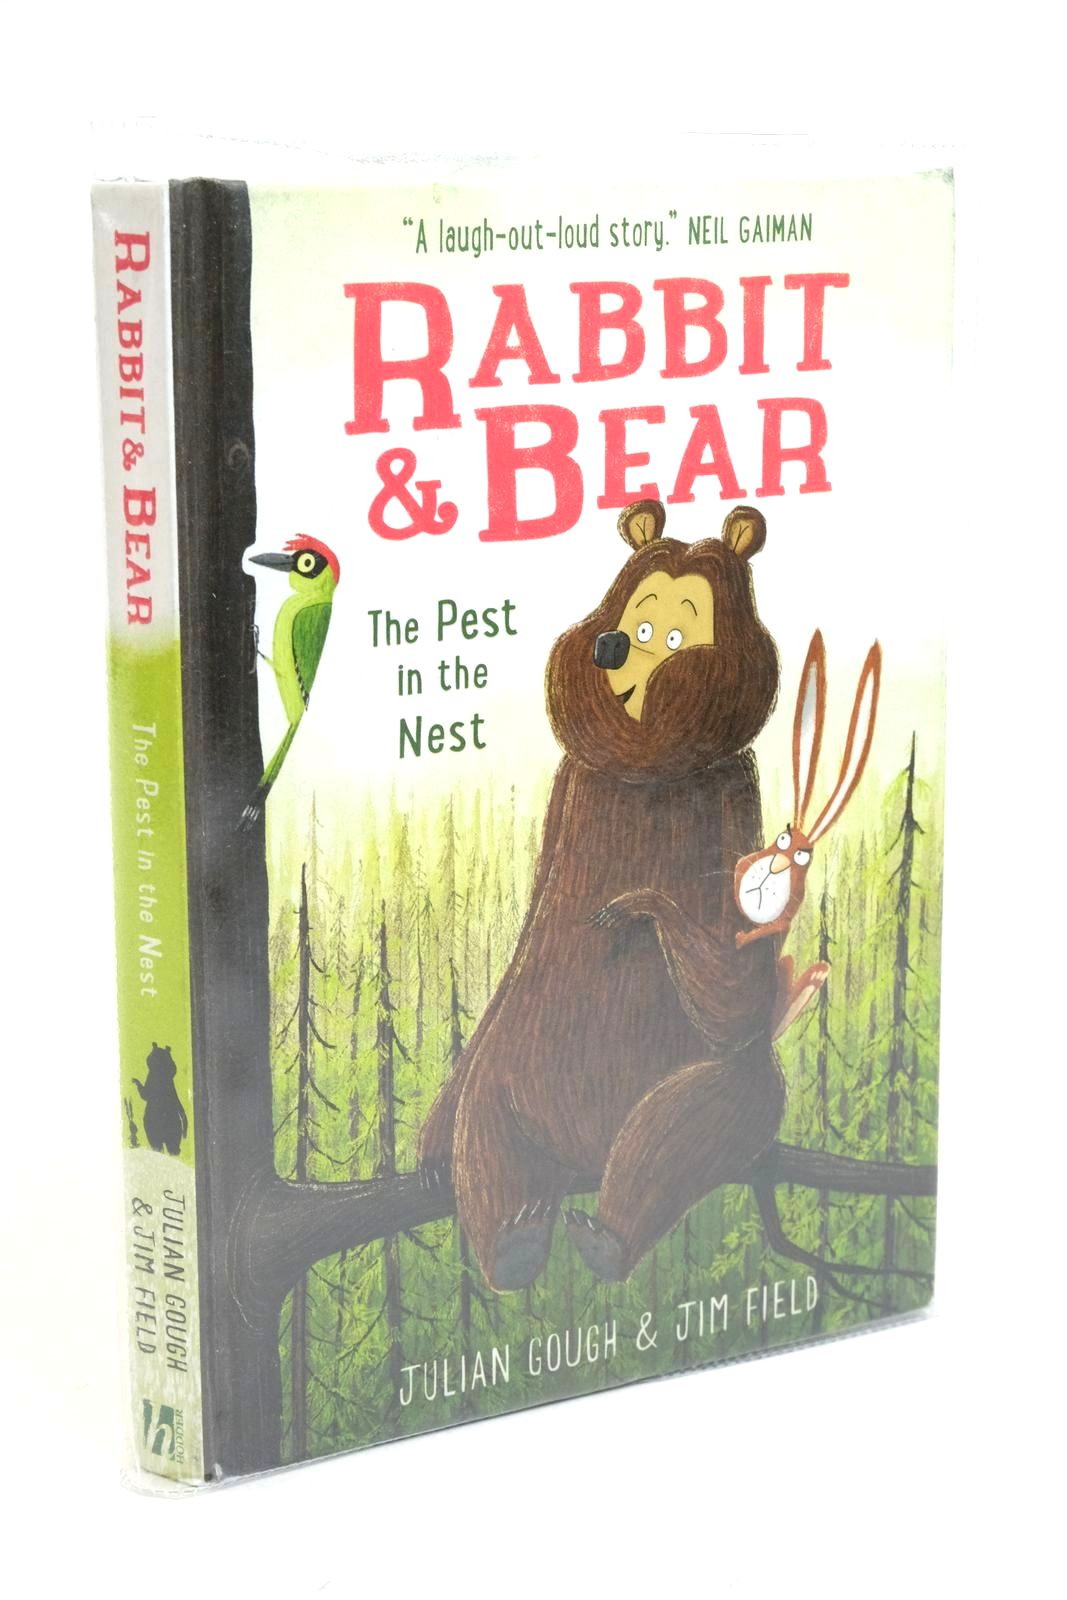 Photo of RABBIT & BEAR - THE PEST IN THE NEST written by Gough, Julian illustrated by Field, Jim published by Hodder Children's Books (STOCK CODE: 1322409)  for sale by Stella & Rose's Books